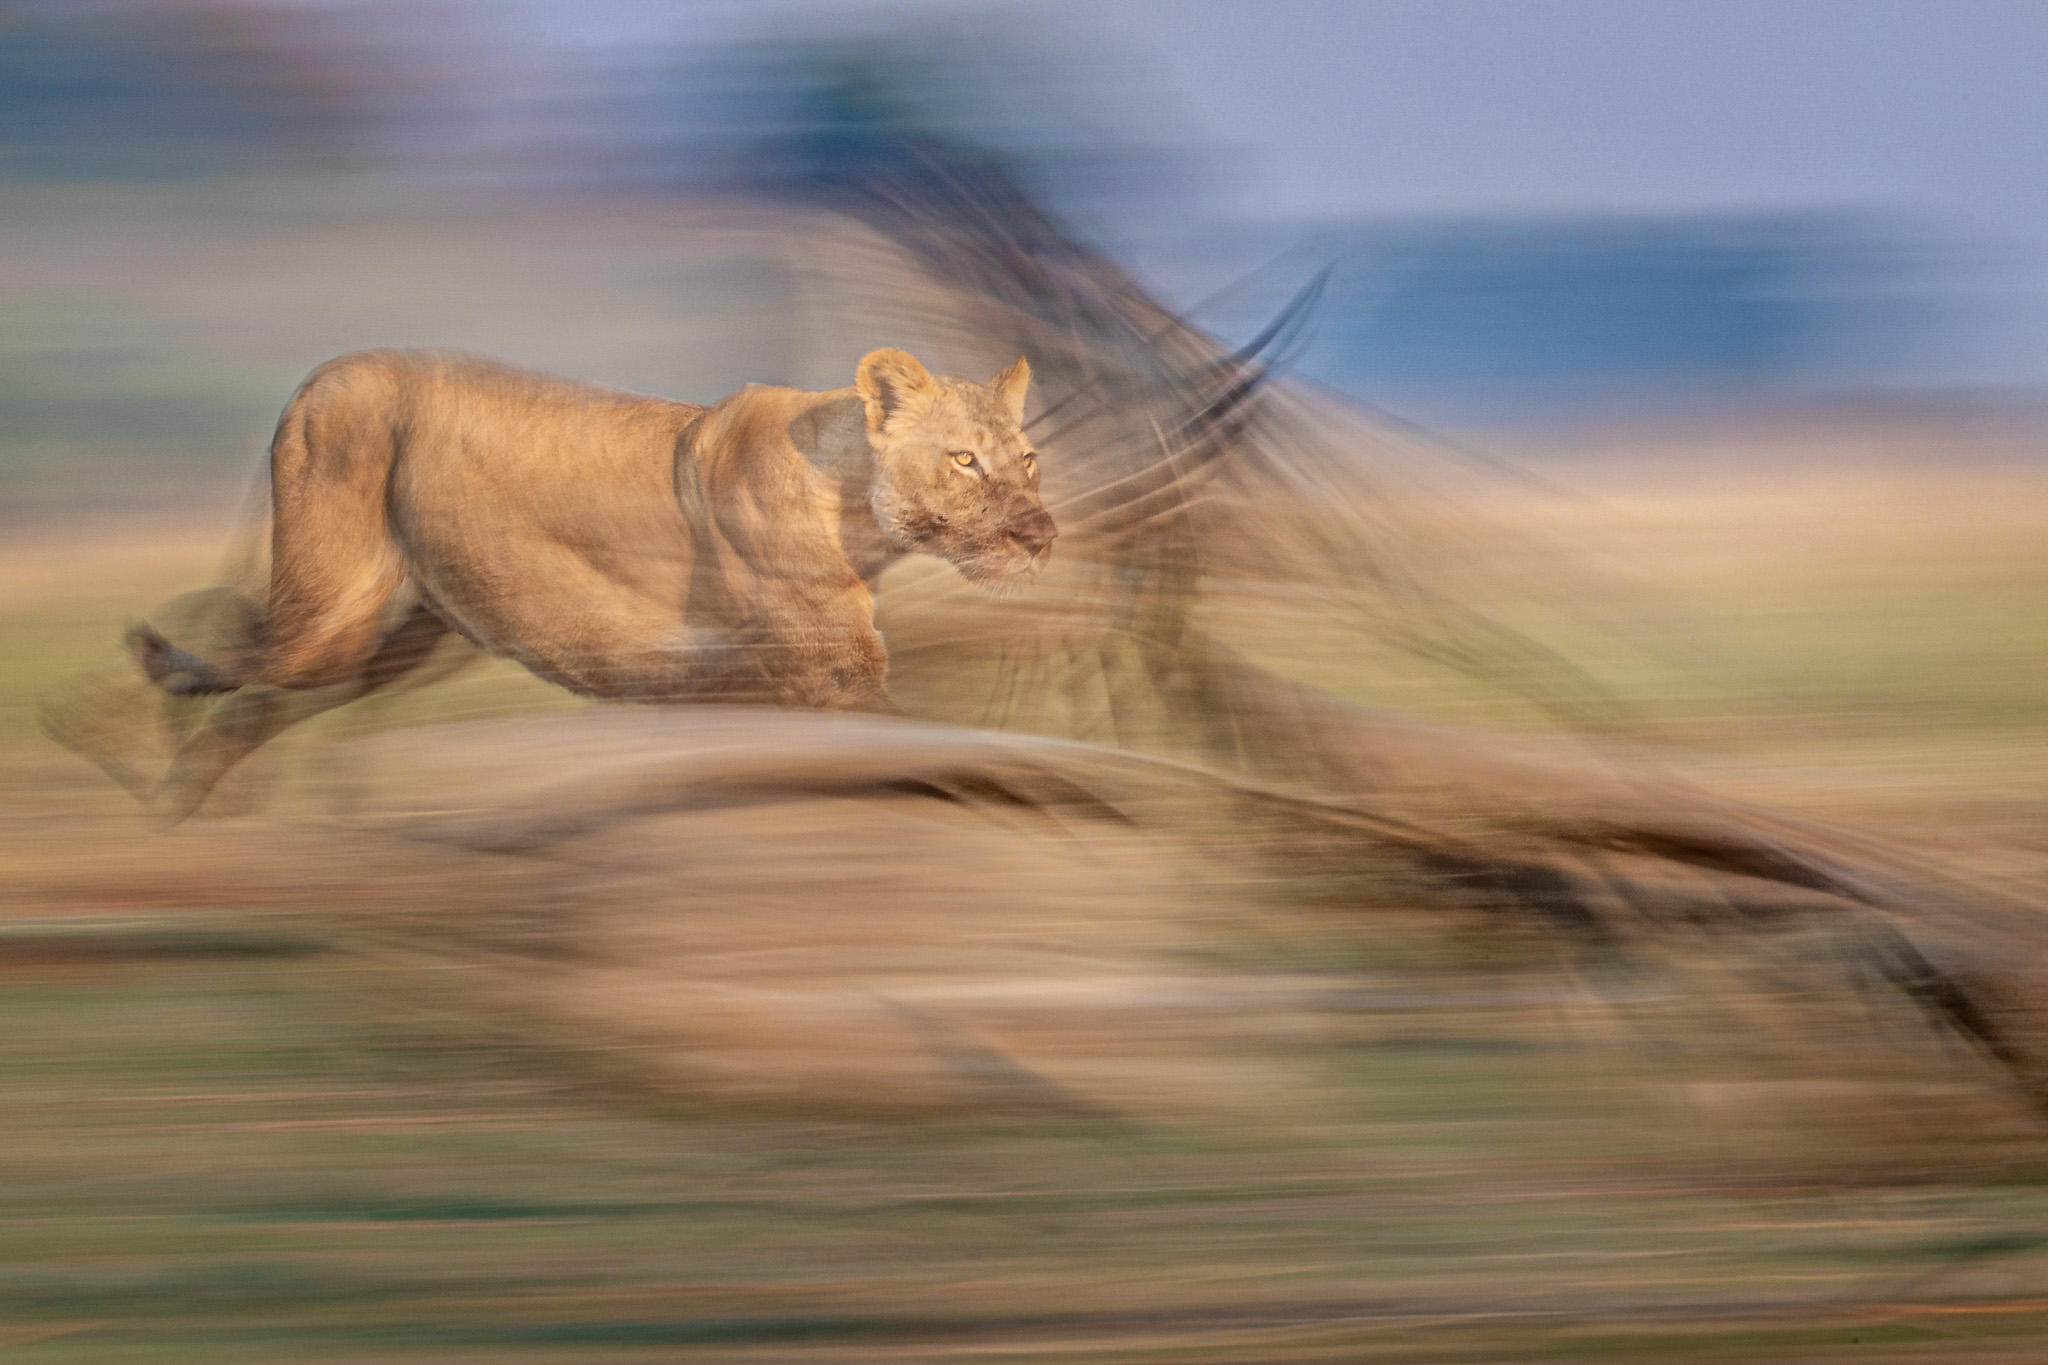 sabine's lions and vulture panning shot